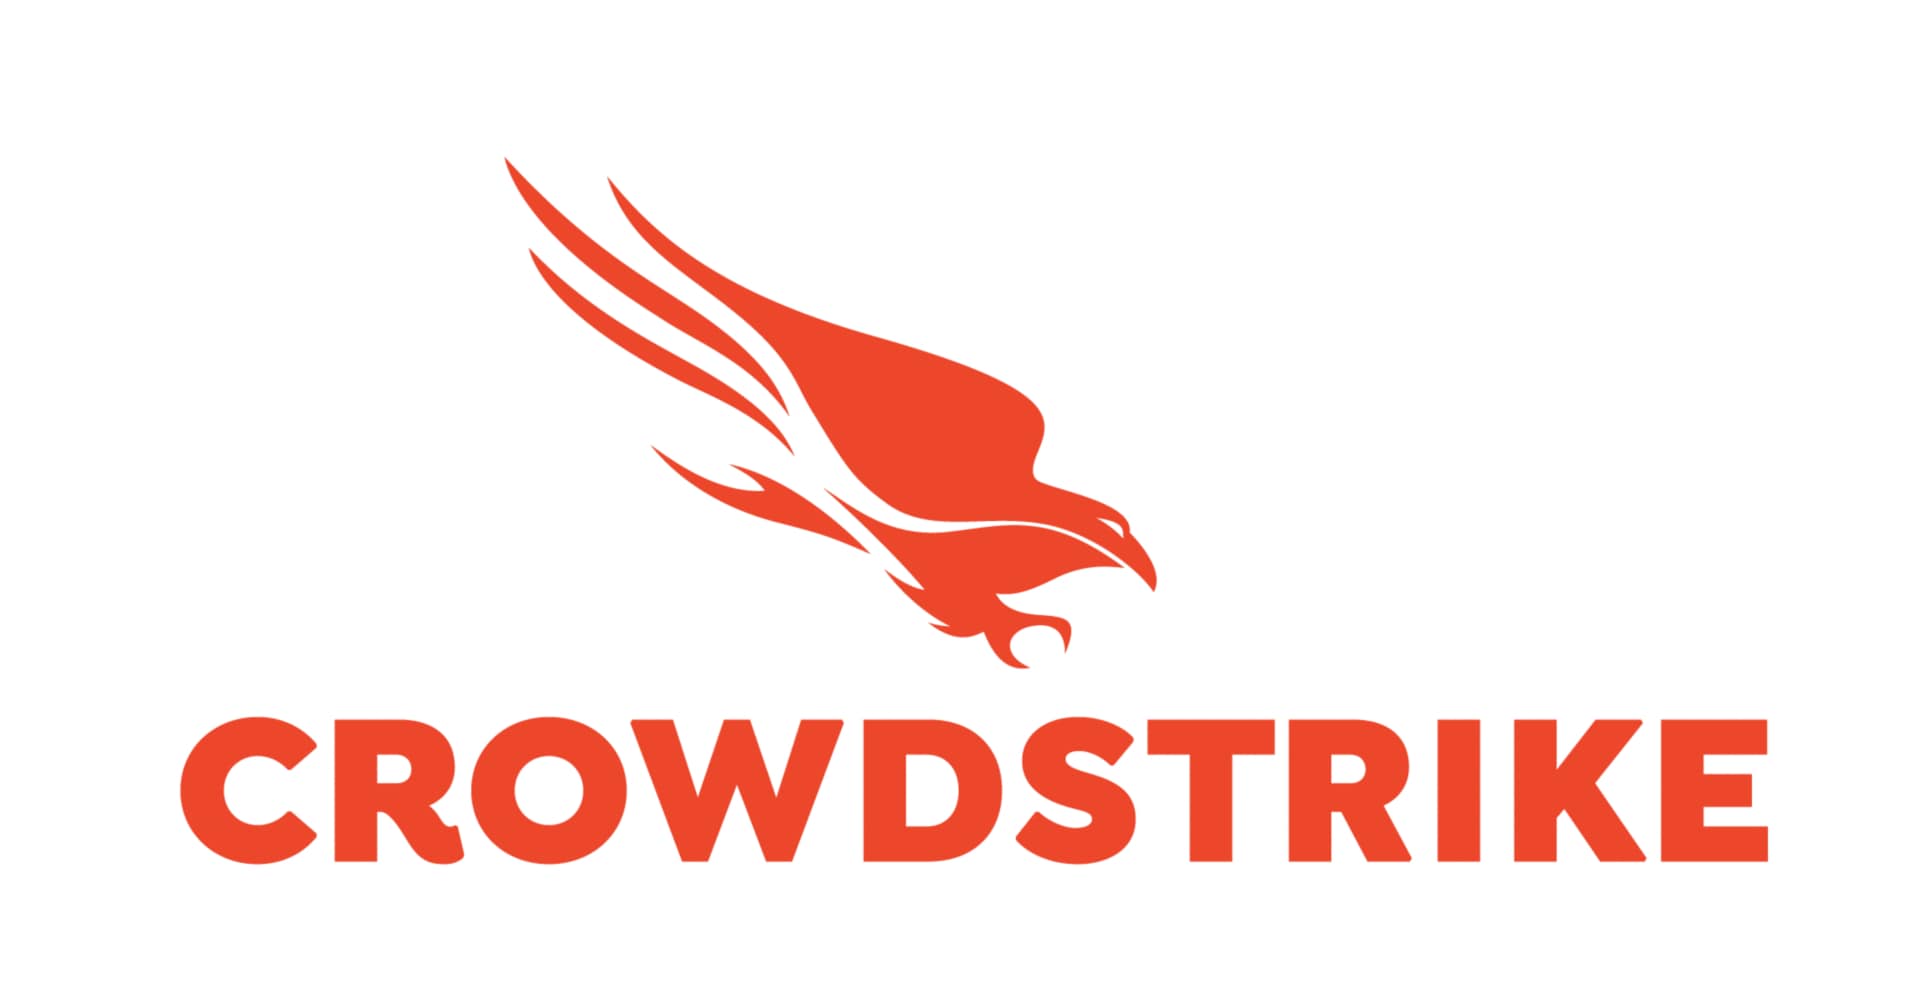 CrowdStrike 12-Month Falcon for Mobile Standard